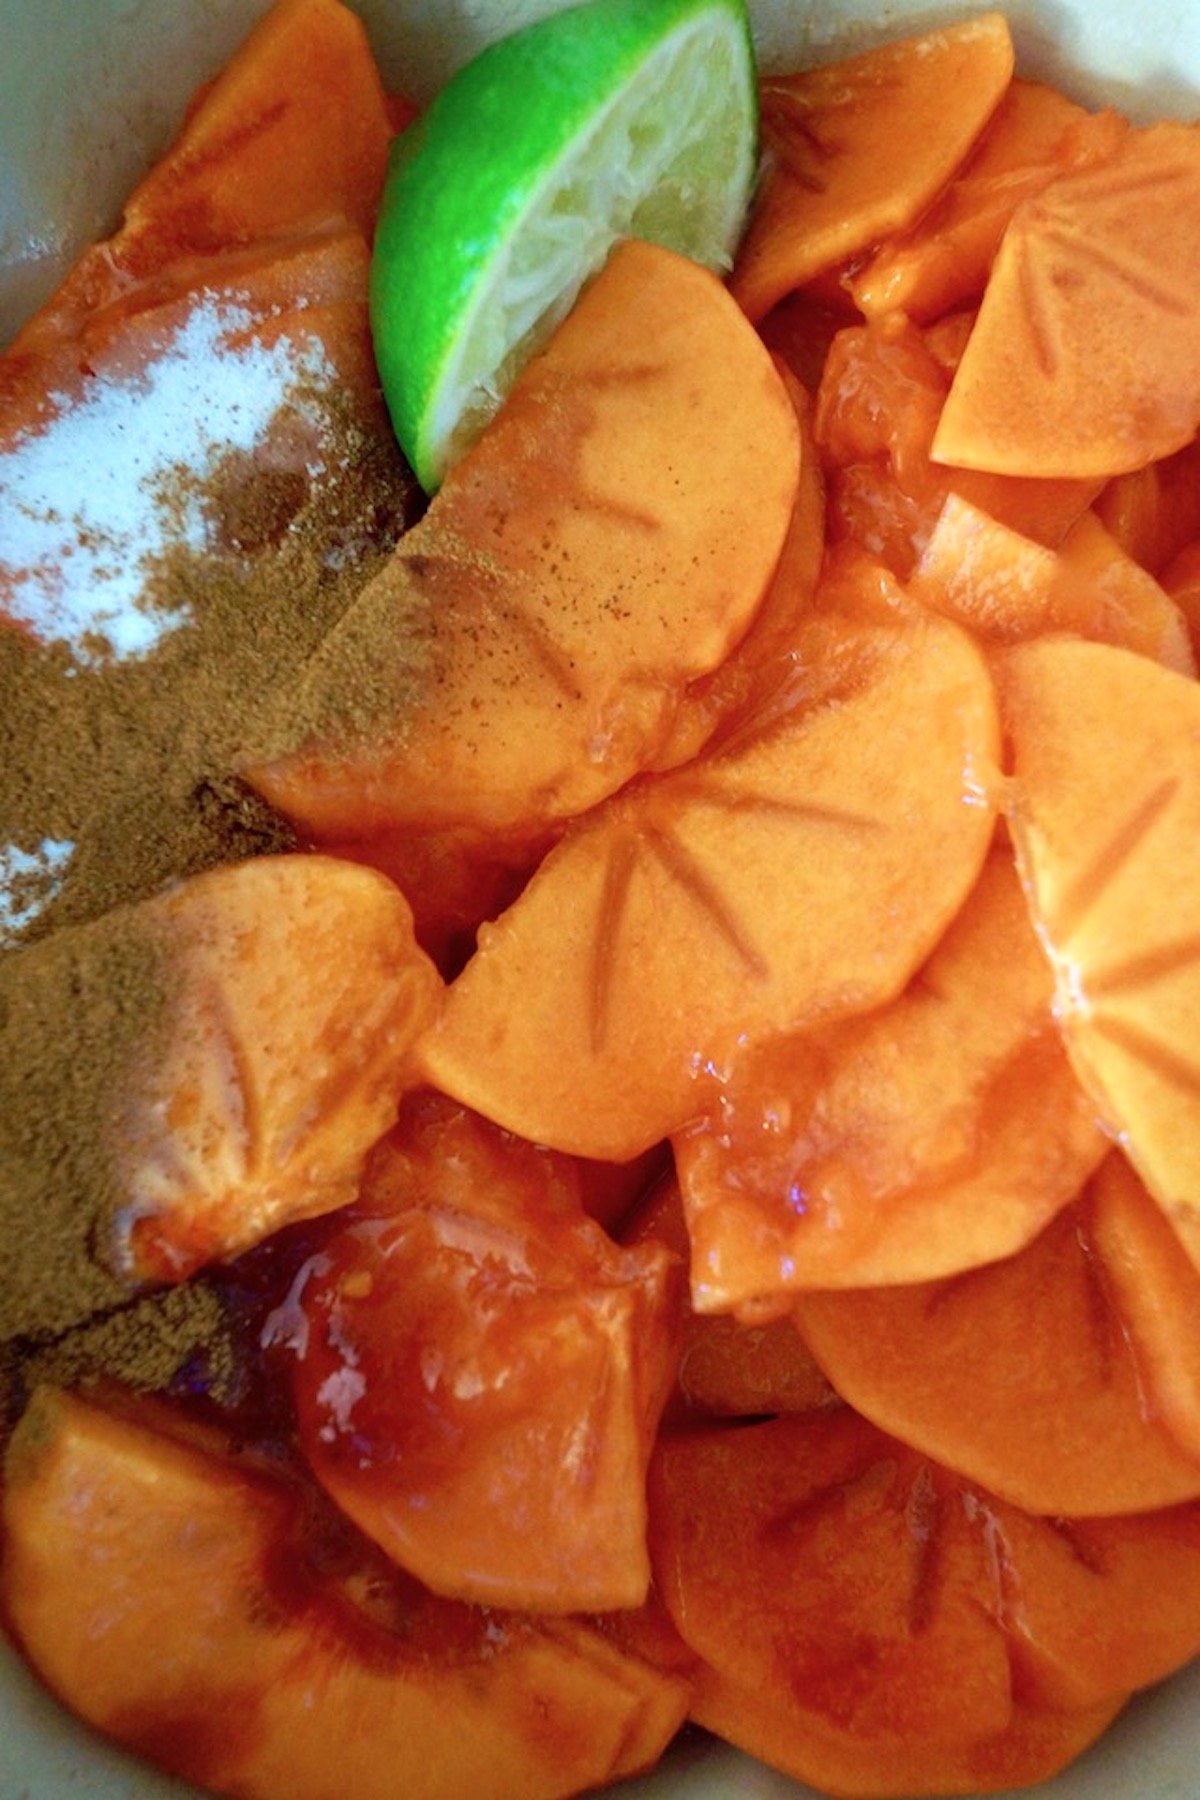 Bowl of persimmon slices and spices.